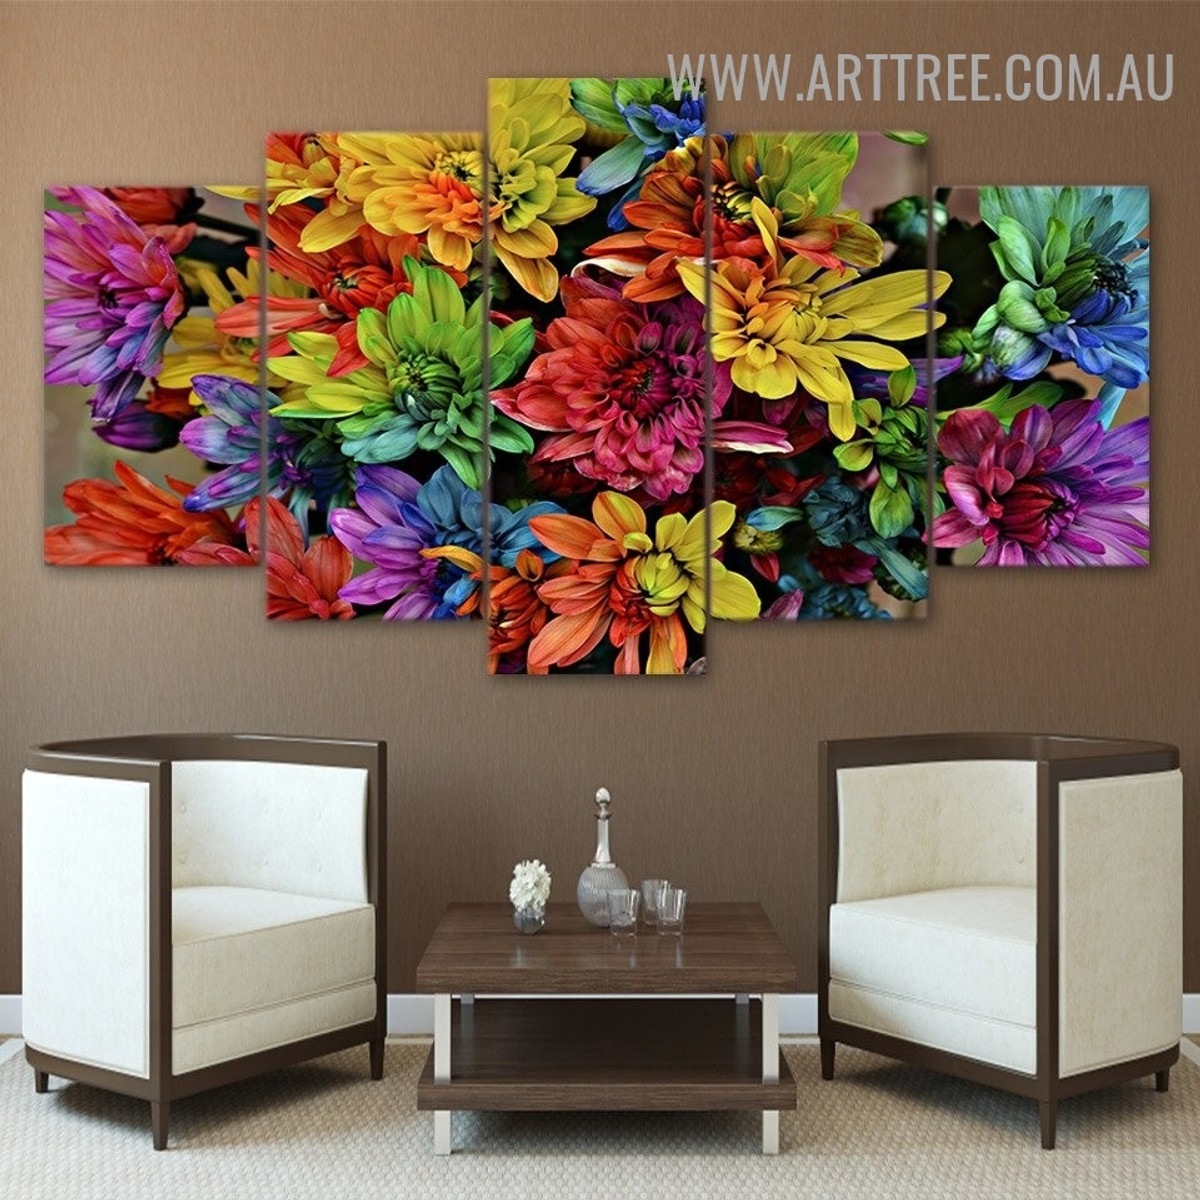 Colorful Floret Flowers Floral Modern 5 Piece Multi Panel Image Canvas Painting Print for Room Wall Adornment